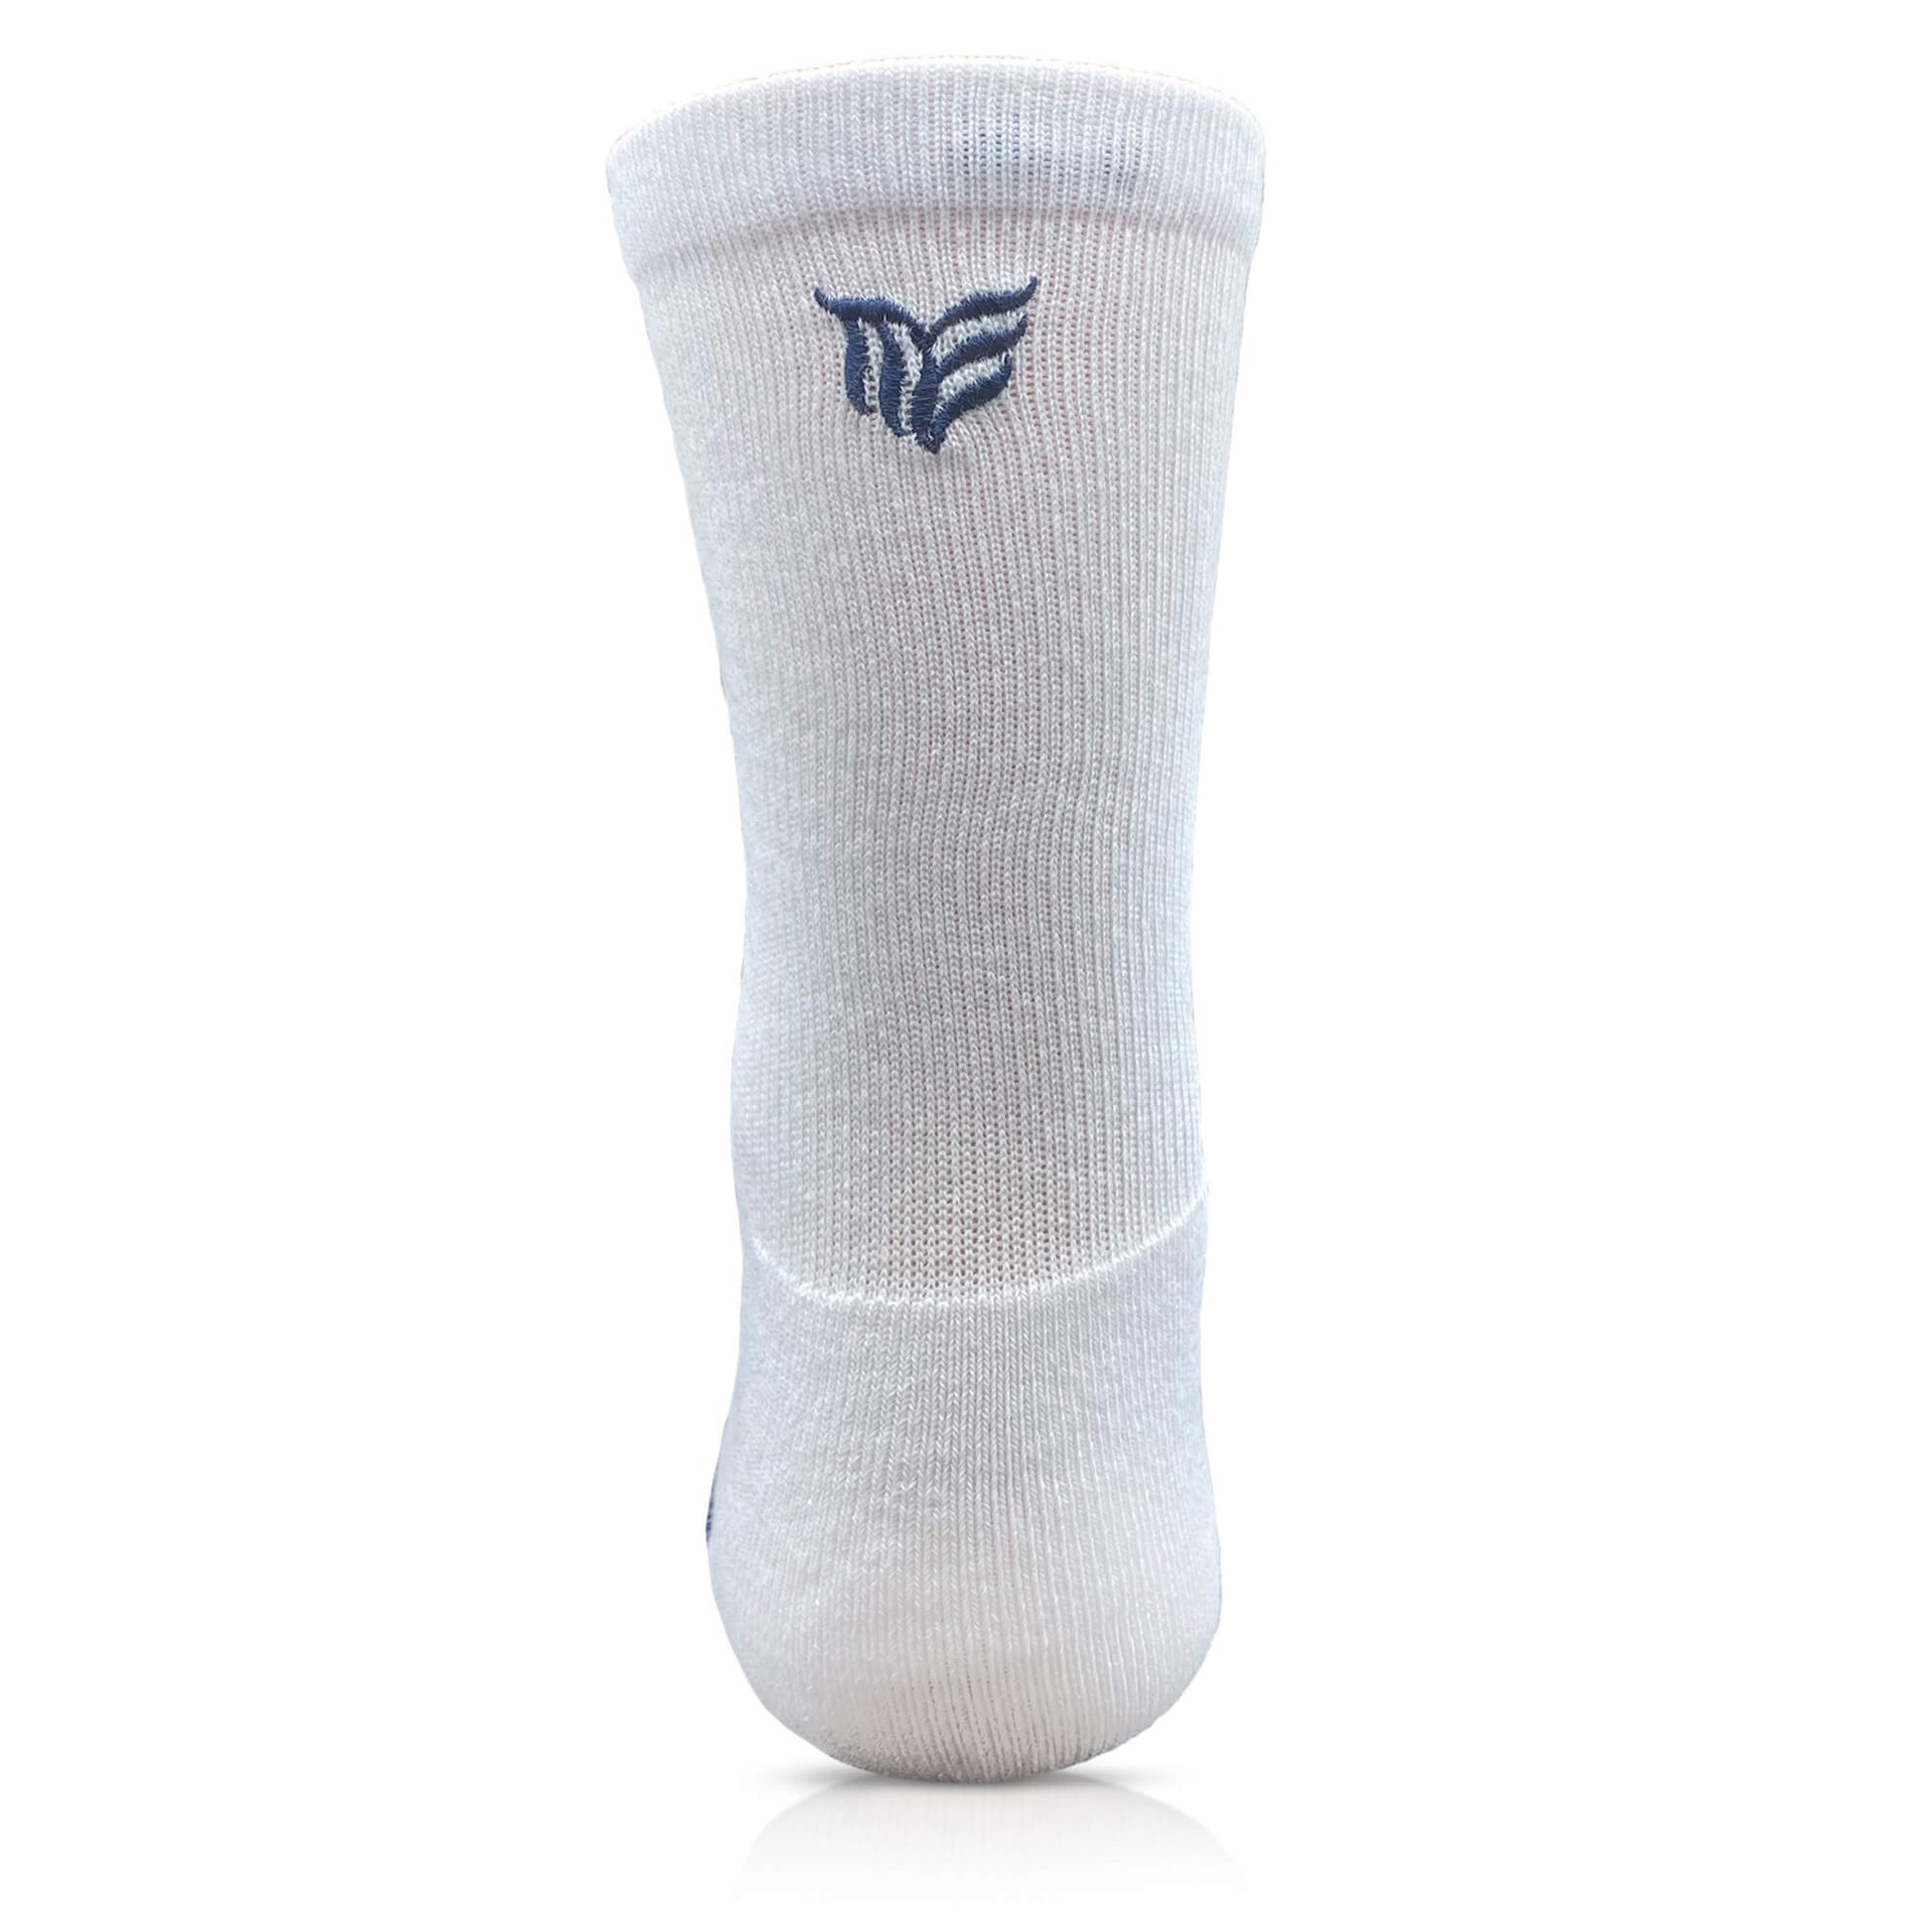 Good Fortune arch band crew sock White with Navy